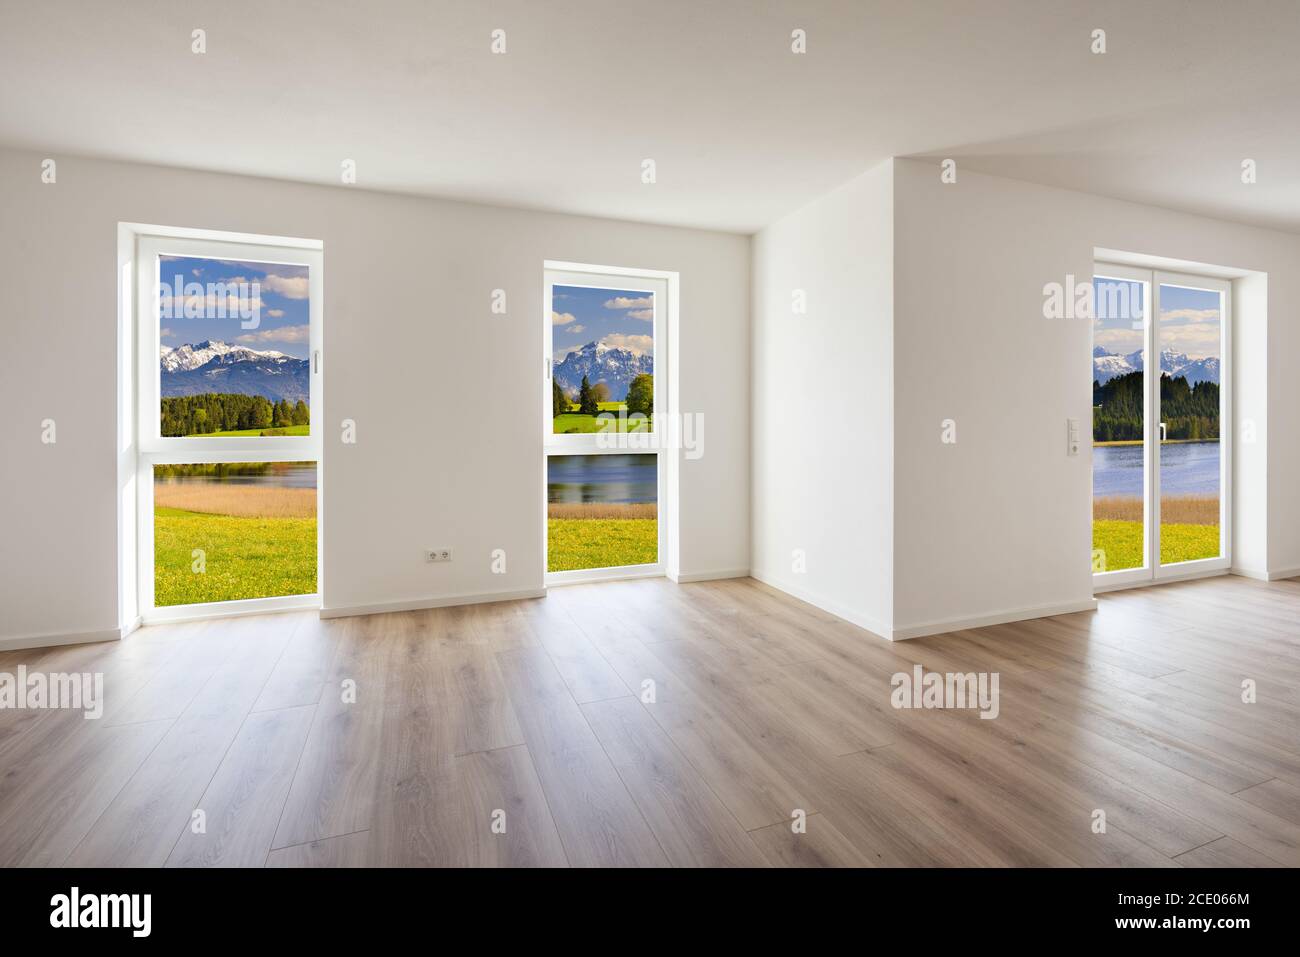 new built room with view through windows to nature Stock Photo